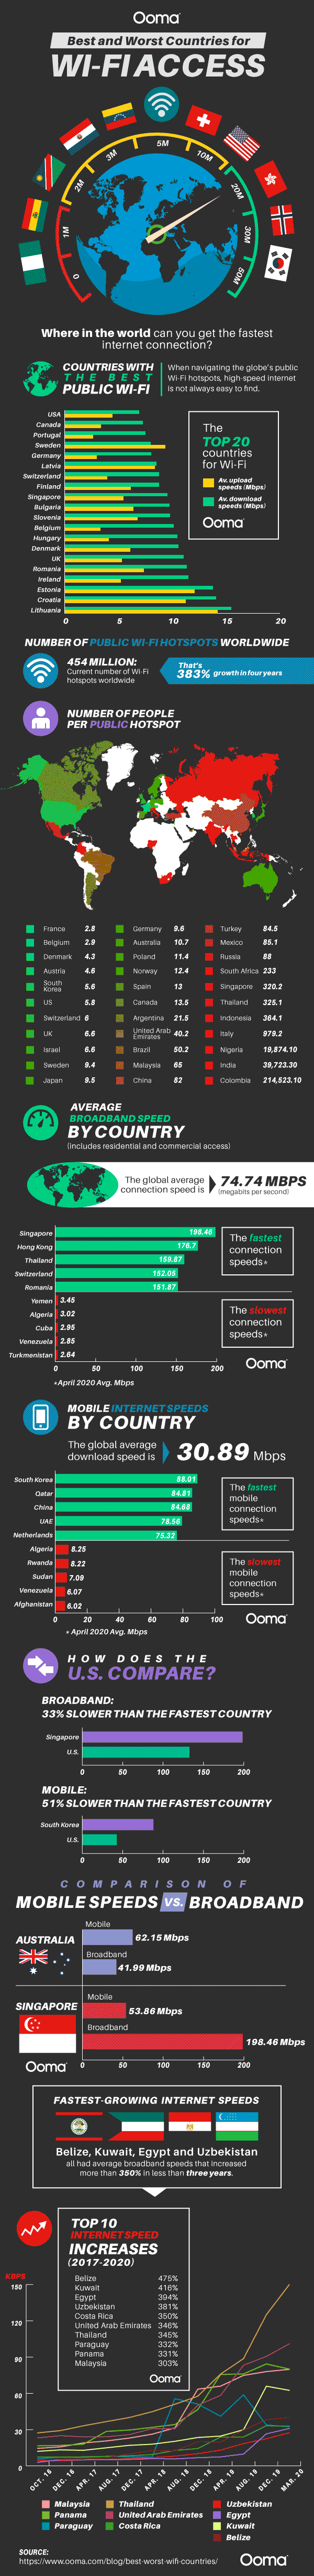 Where in the Can You Get the Best Wi-Fi Access? | Ooma